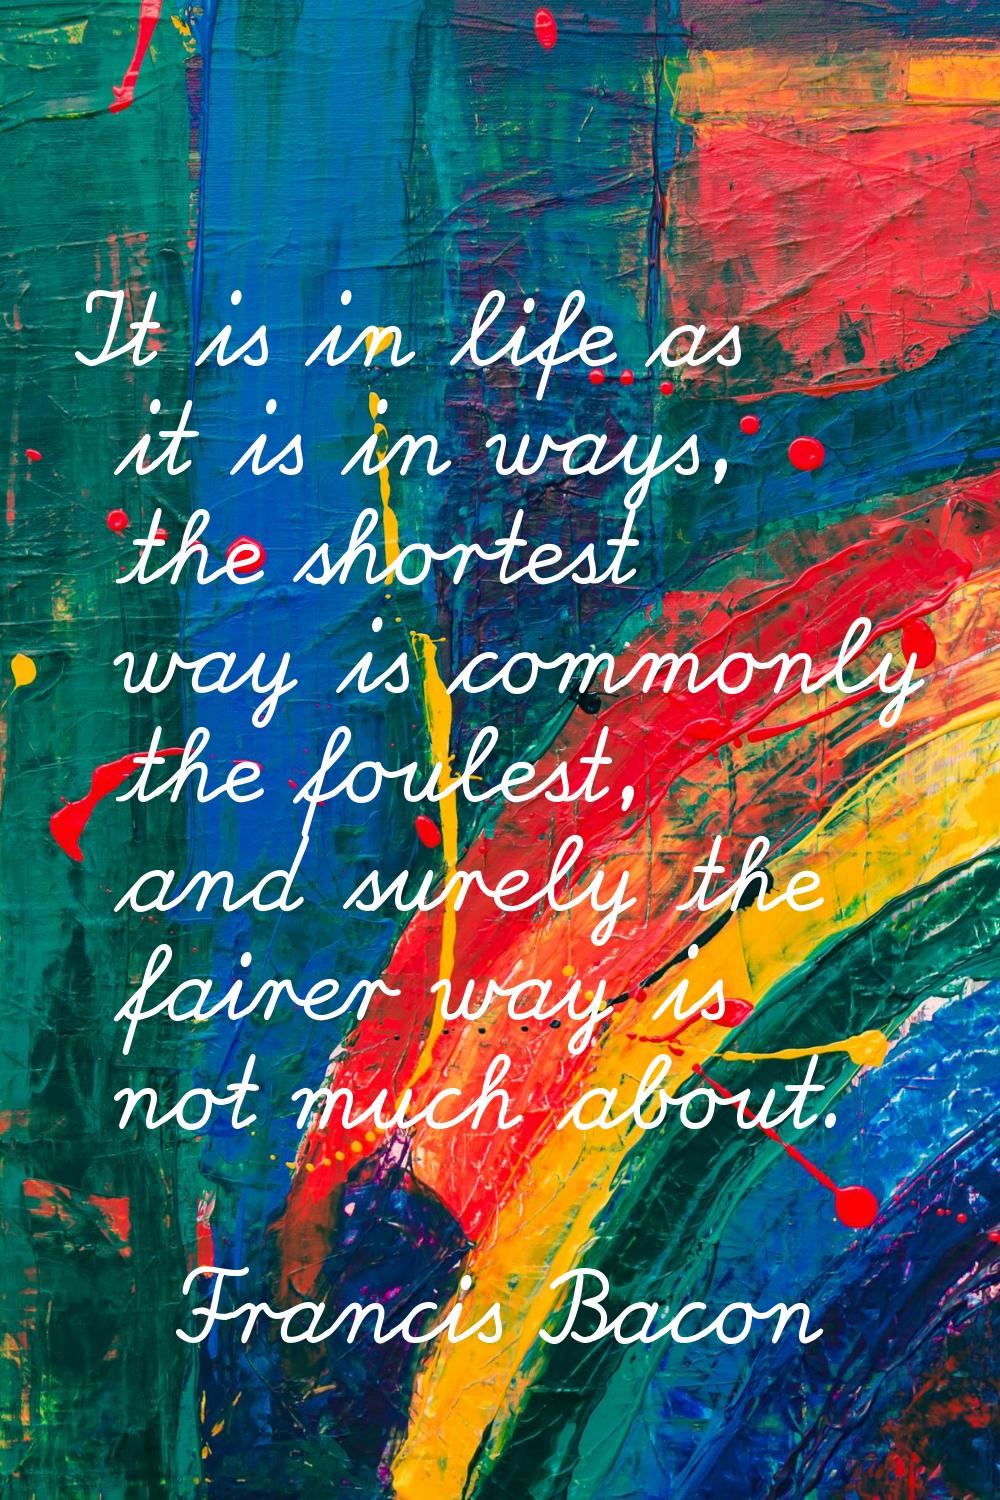 It is in life as it is in ways, the shortest way is commonly the foulest, and surely the fairer way